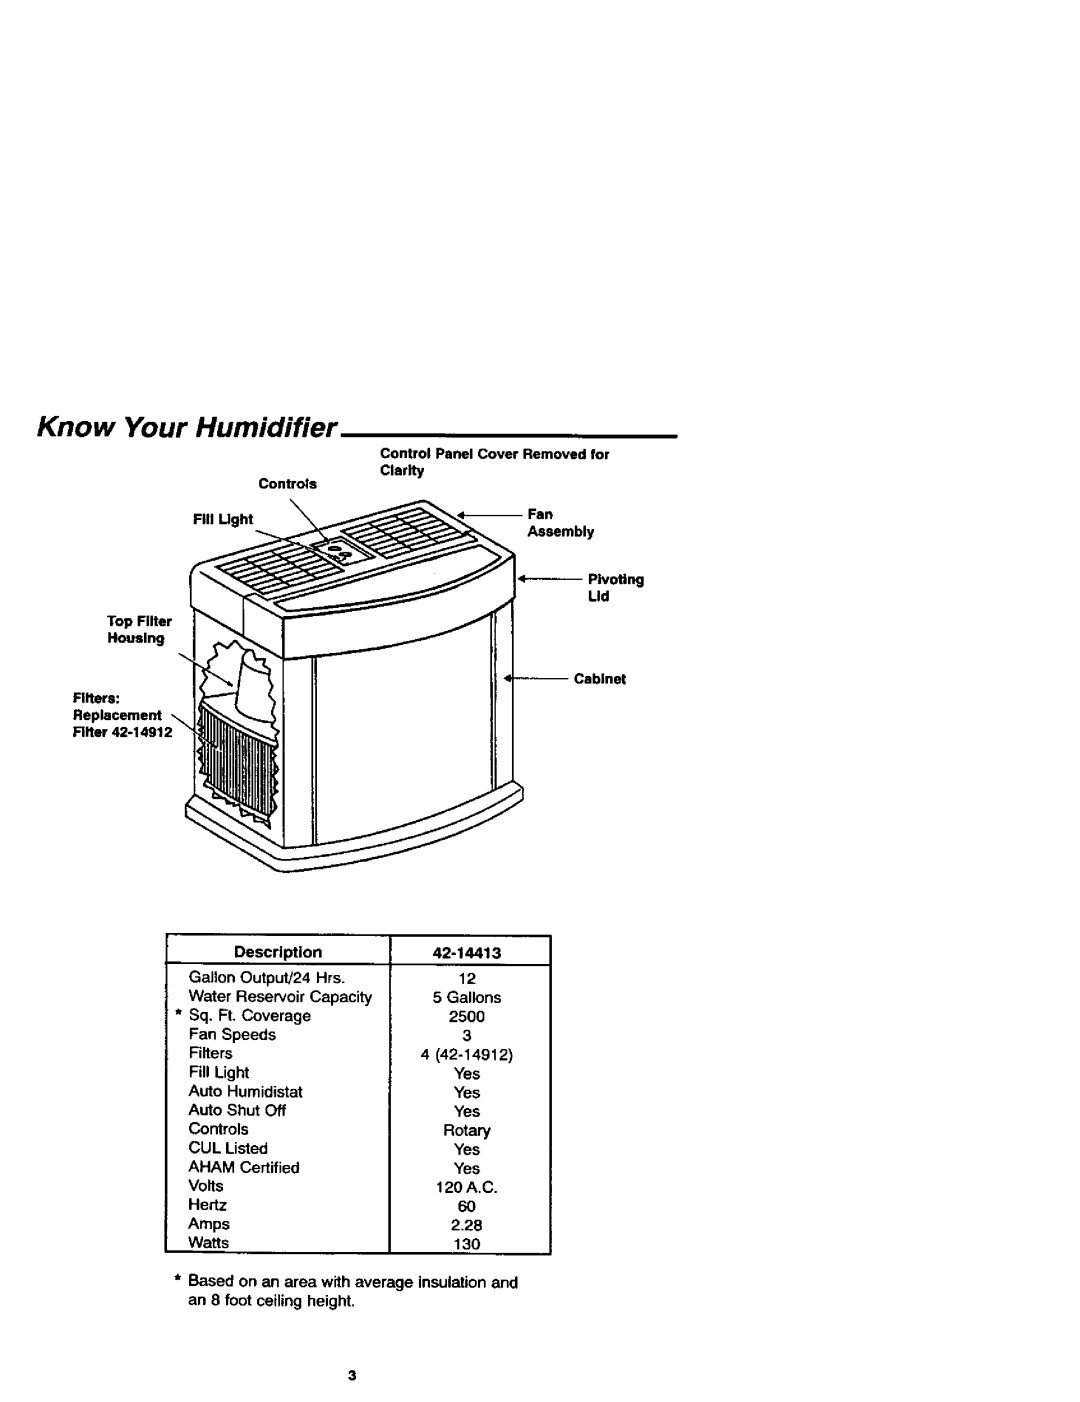 Sears 758.144131 owner manual Know Your Humidifier 